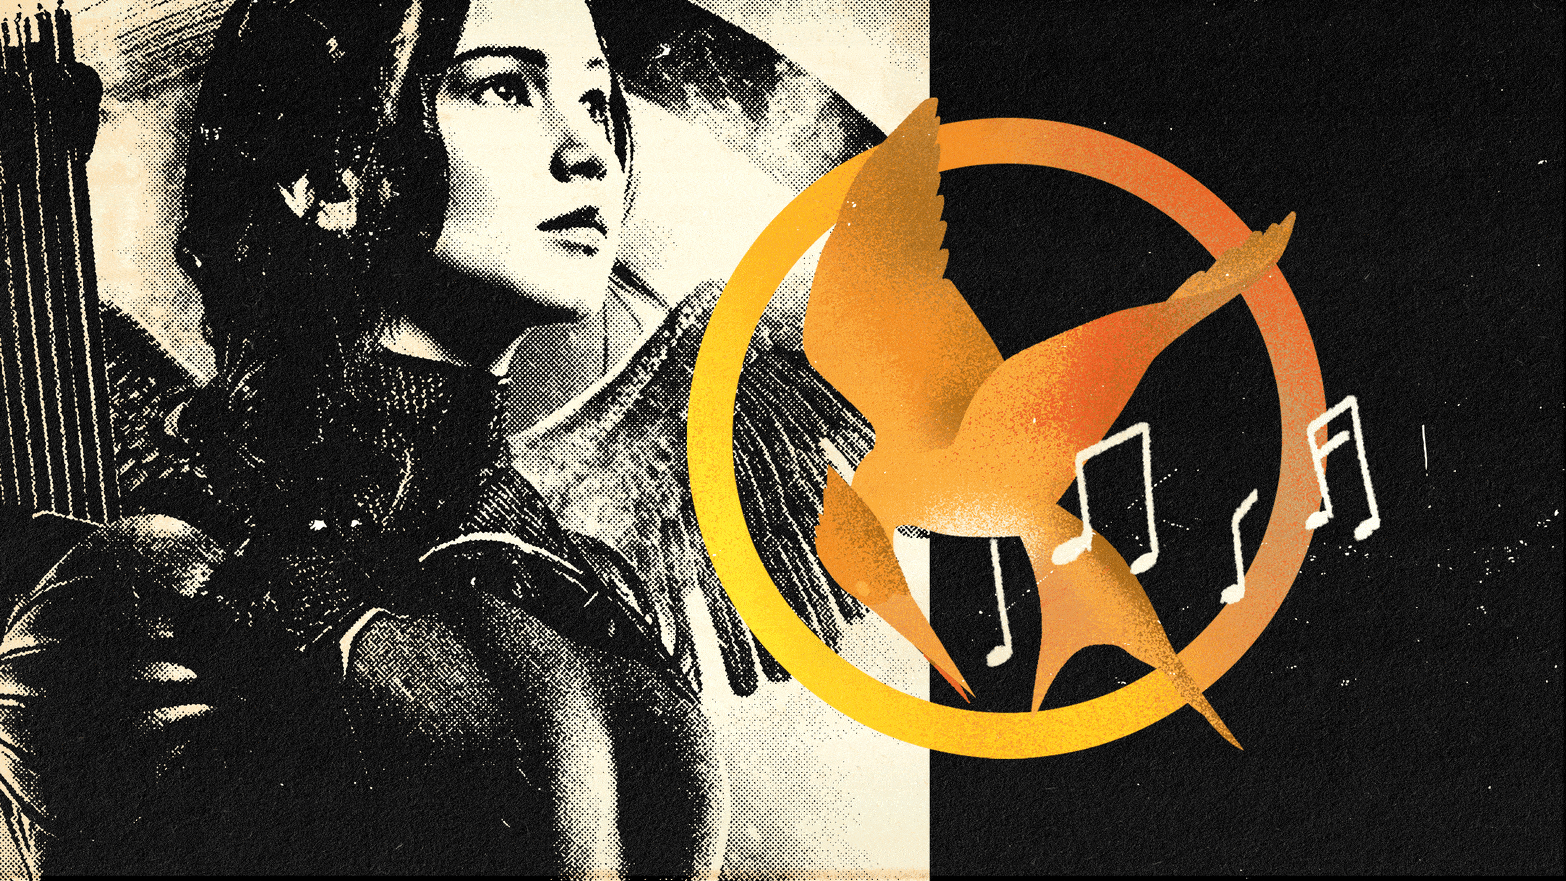 Review: Jennifer Lawrence and 'The Hunger Games' deserved a better